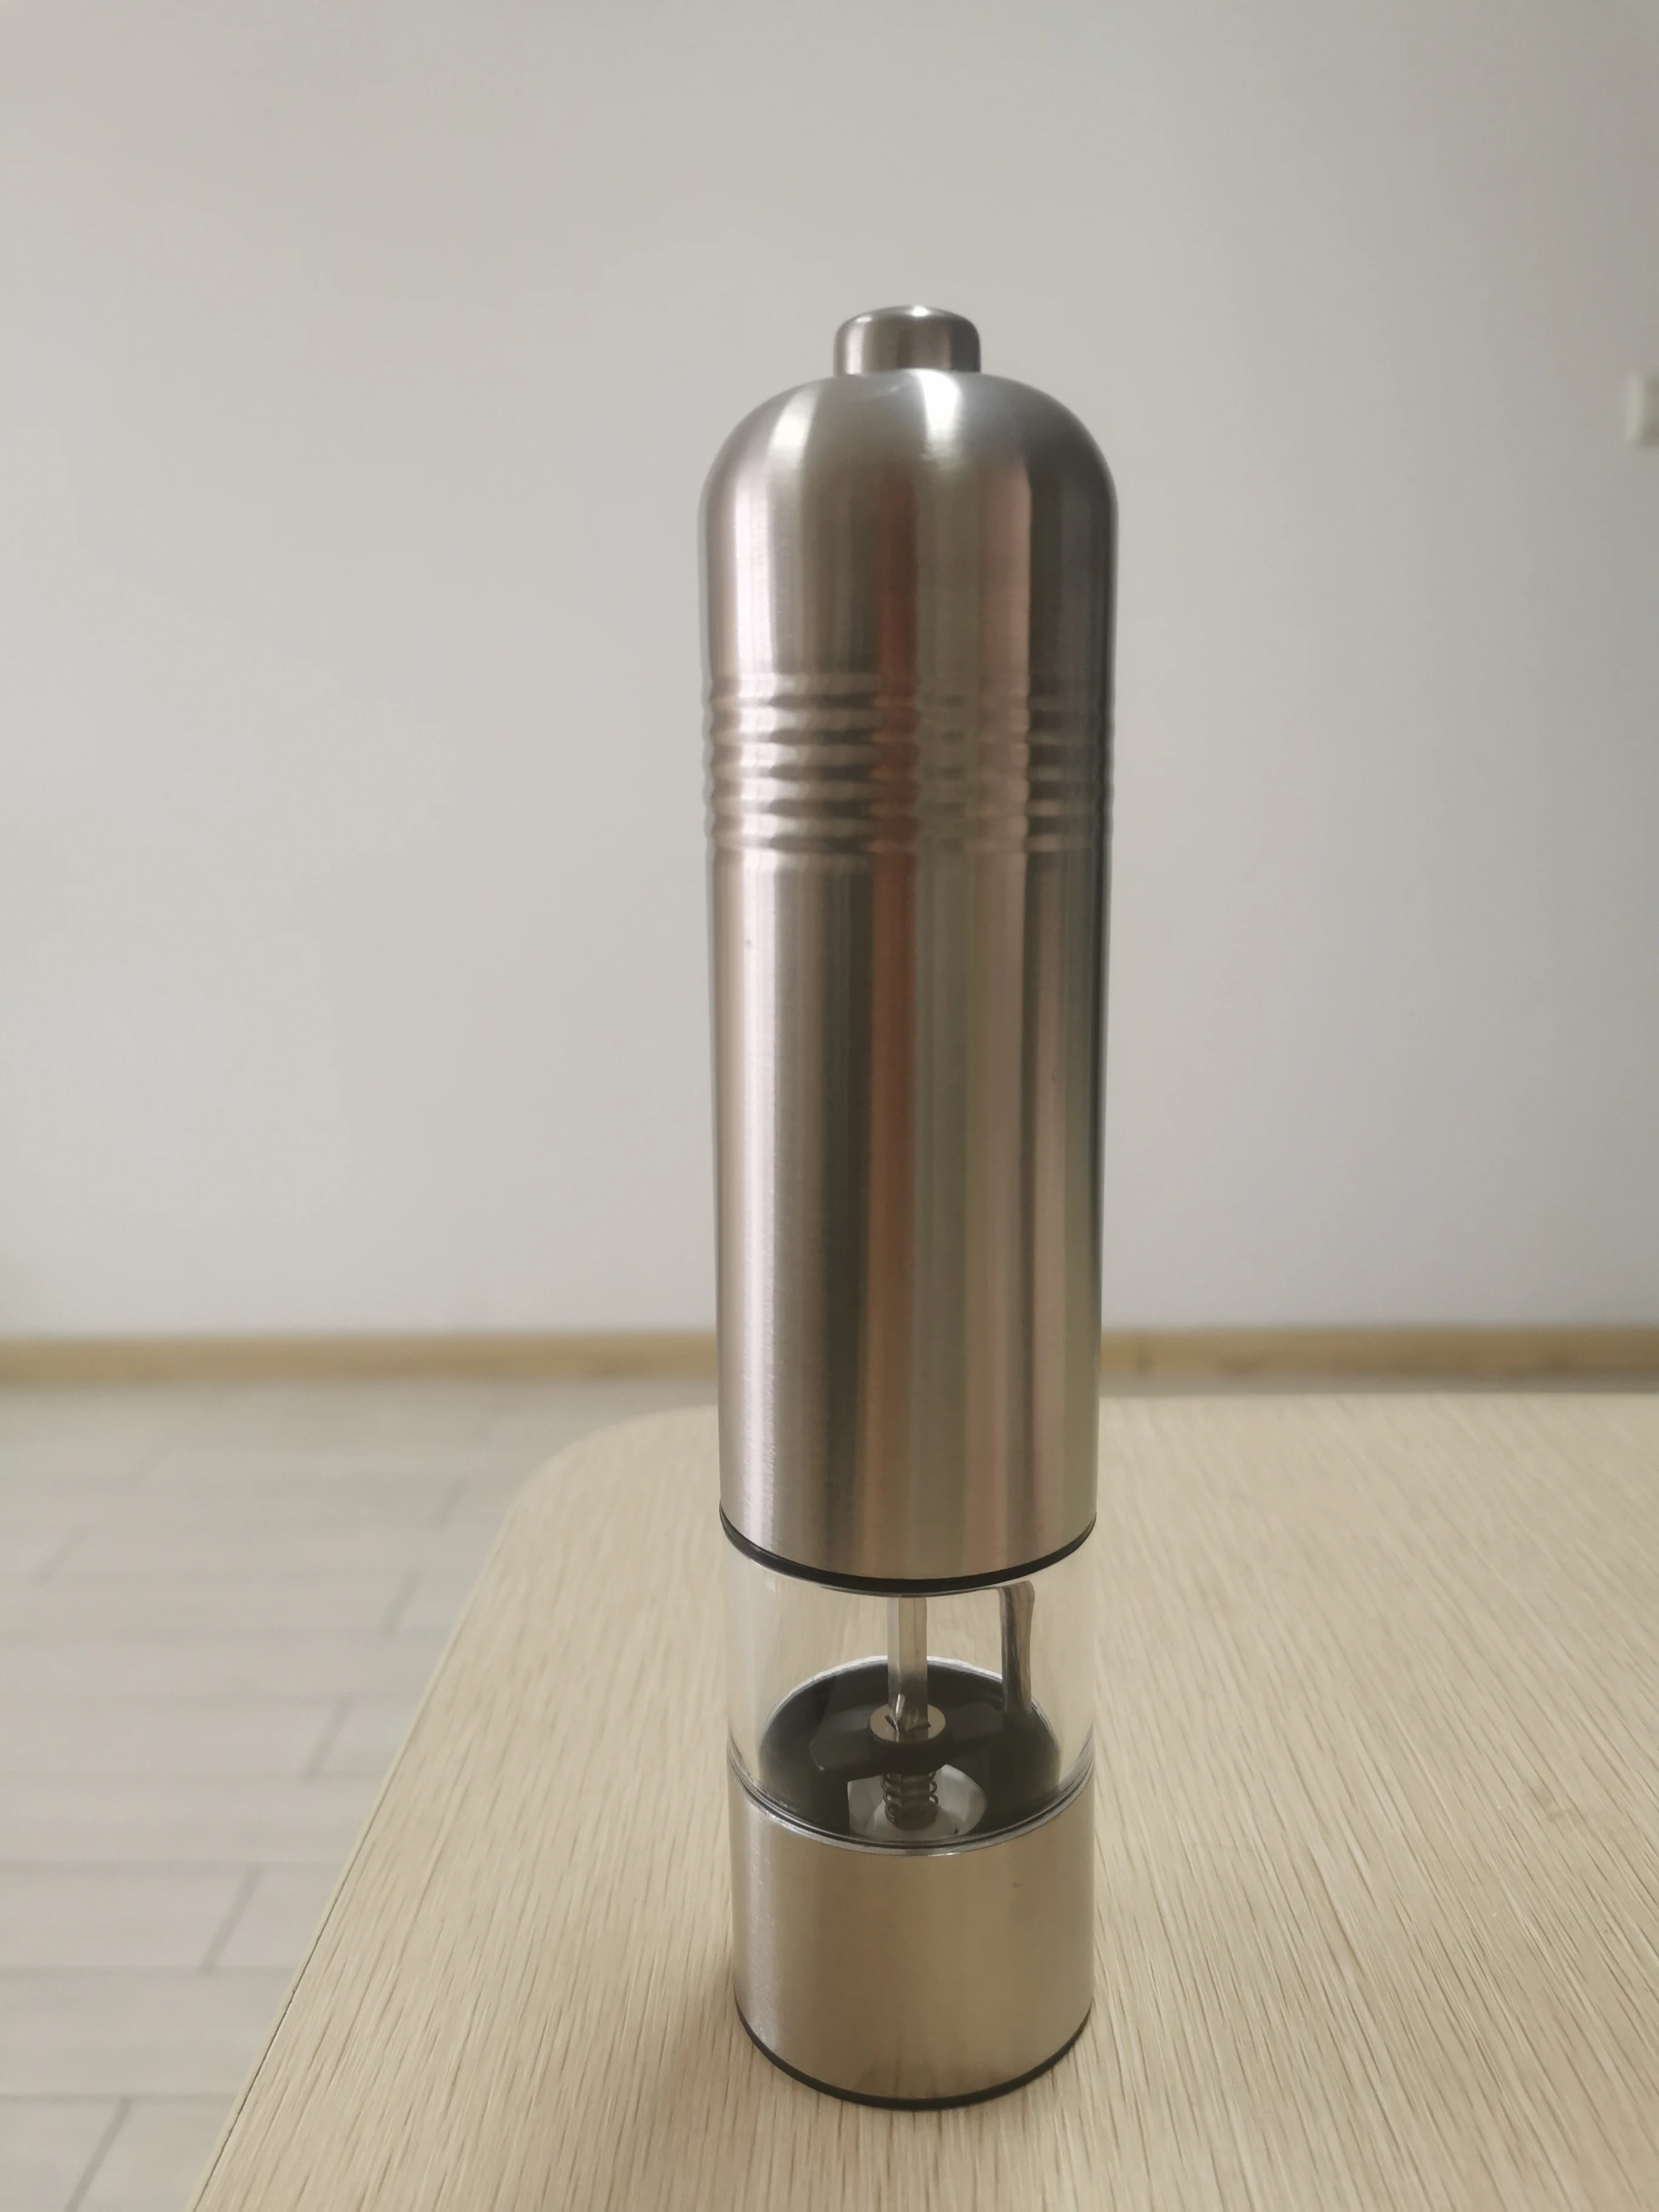 China manufacturing source manufacturersstainless steel electric salt and pepper mill with light with base